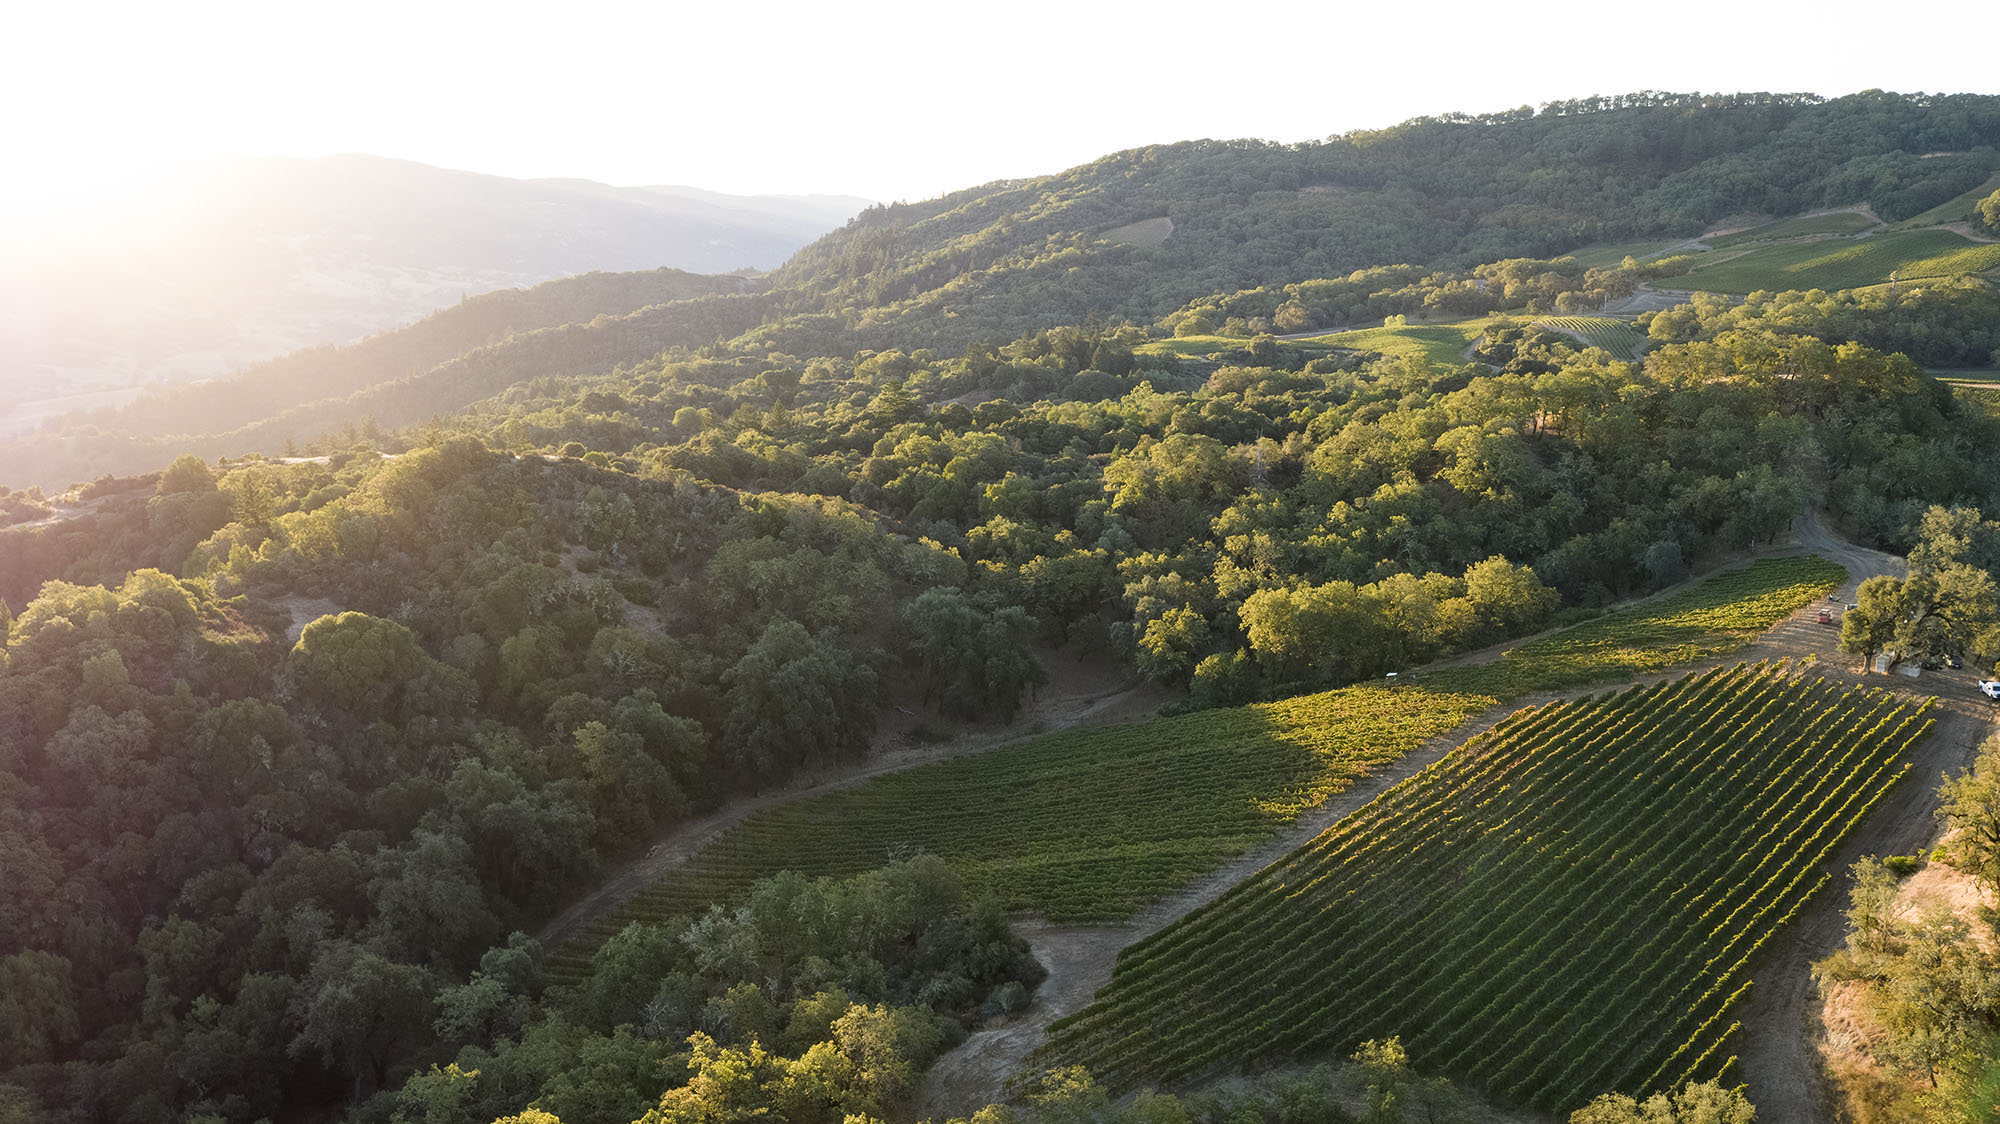 A birds-eye view photograph of a vineyard, with hills and sprawling, dense trees surrounding the vineyard. 